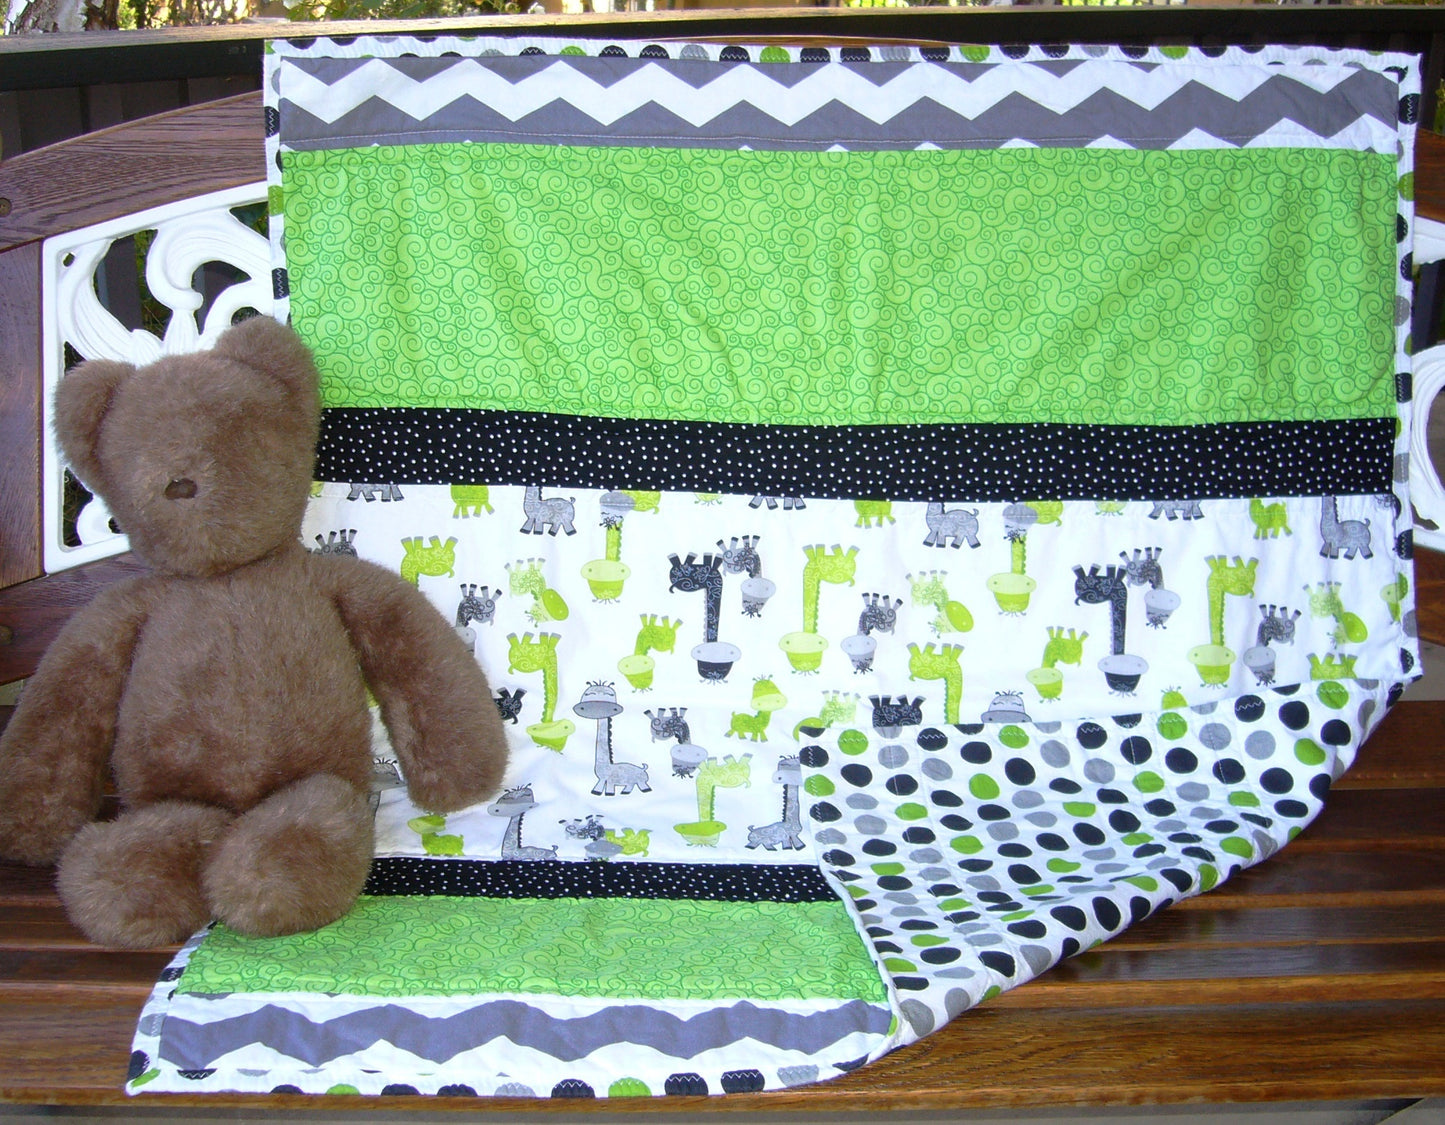 Friendly Giraffe Borders Quilt Baby Nursery Child Toddler Bedding to Adult Lap Blanket